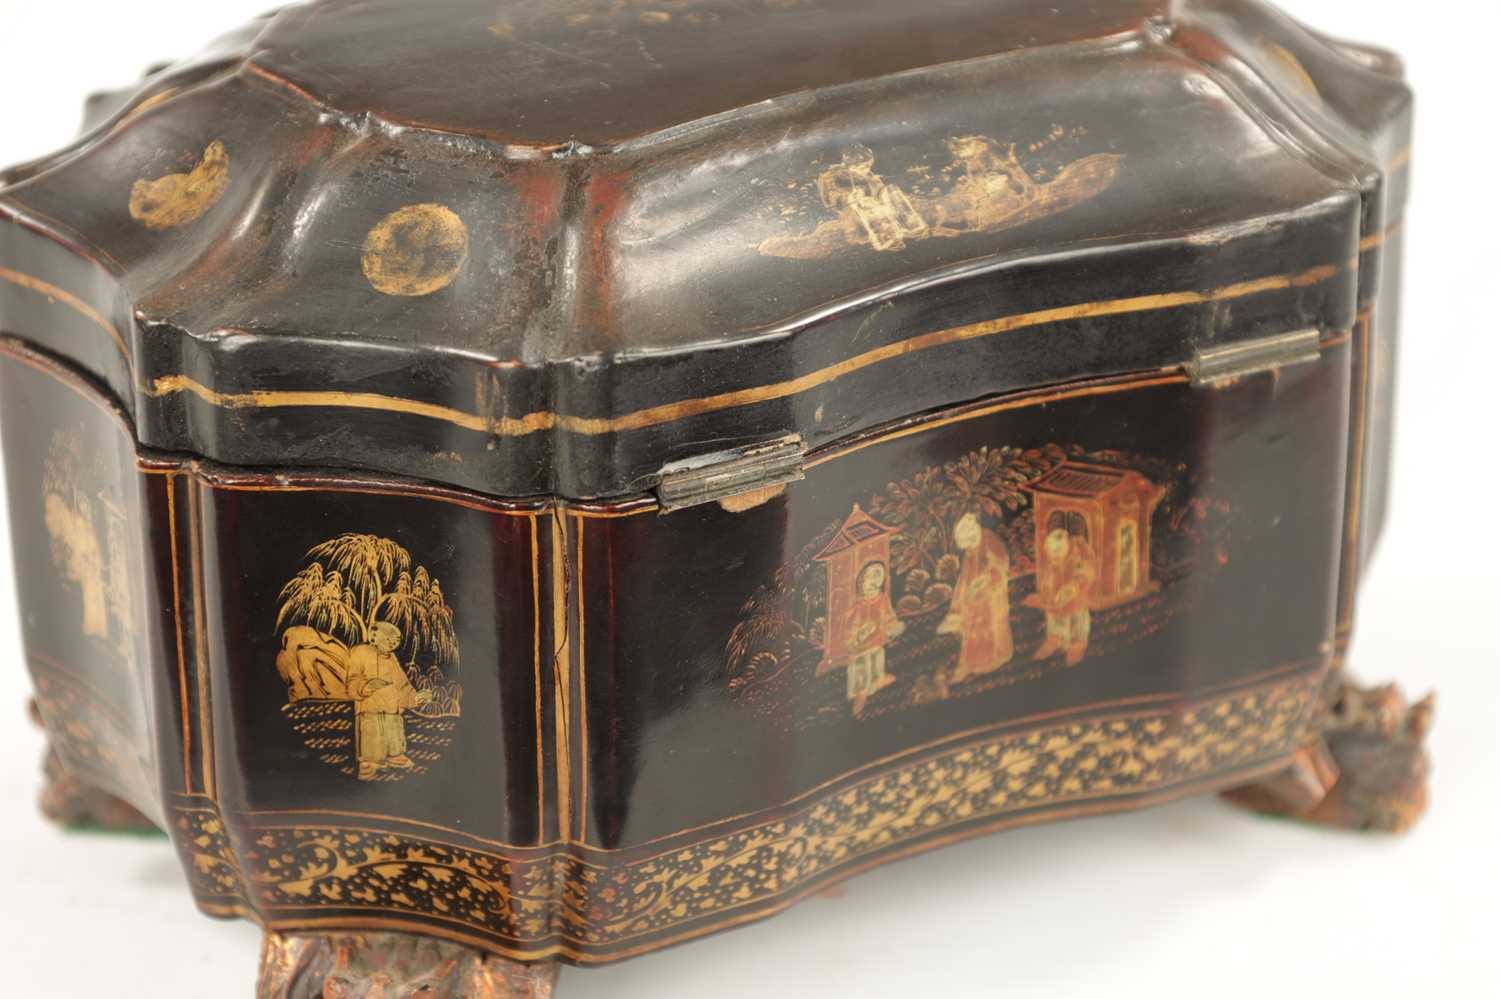 A 19TH CENTURY CHINESE EXPORT CHINOISERIE TEA CADDY - Image 7 of 8